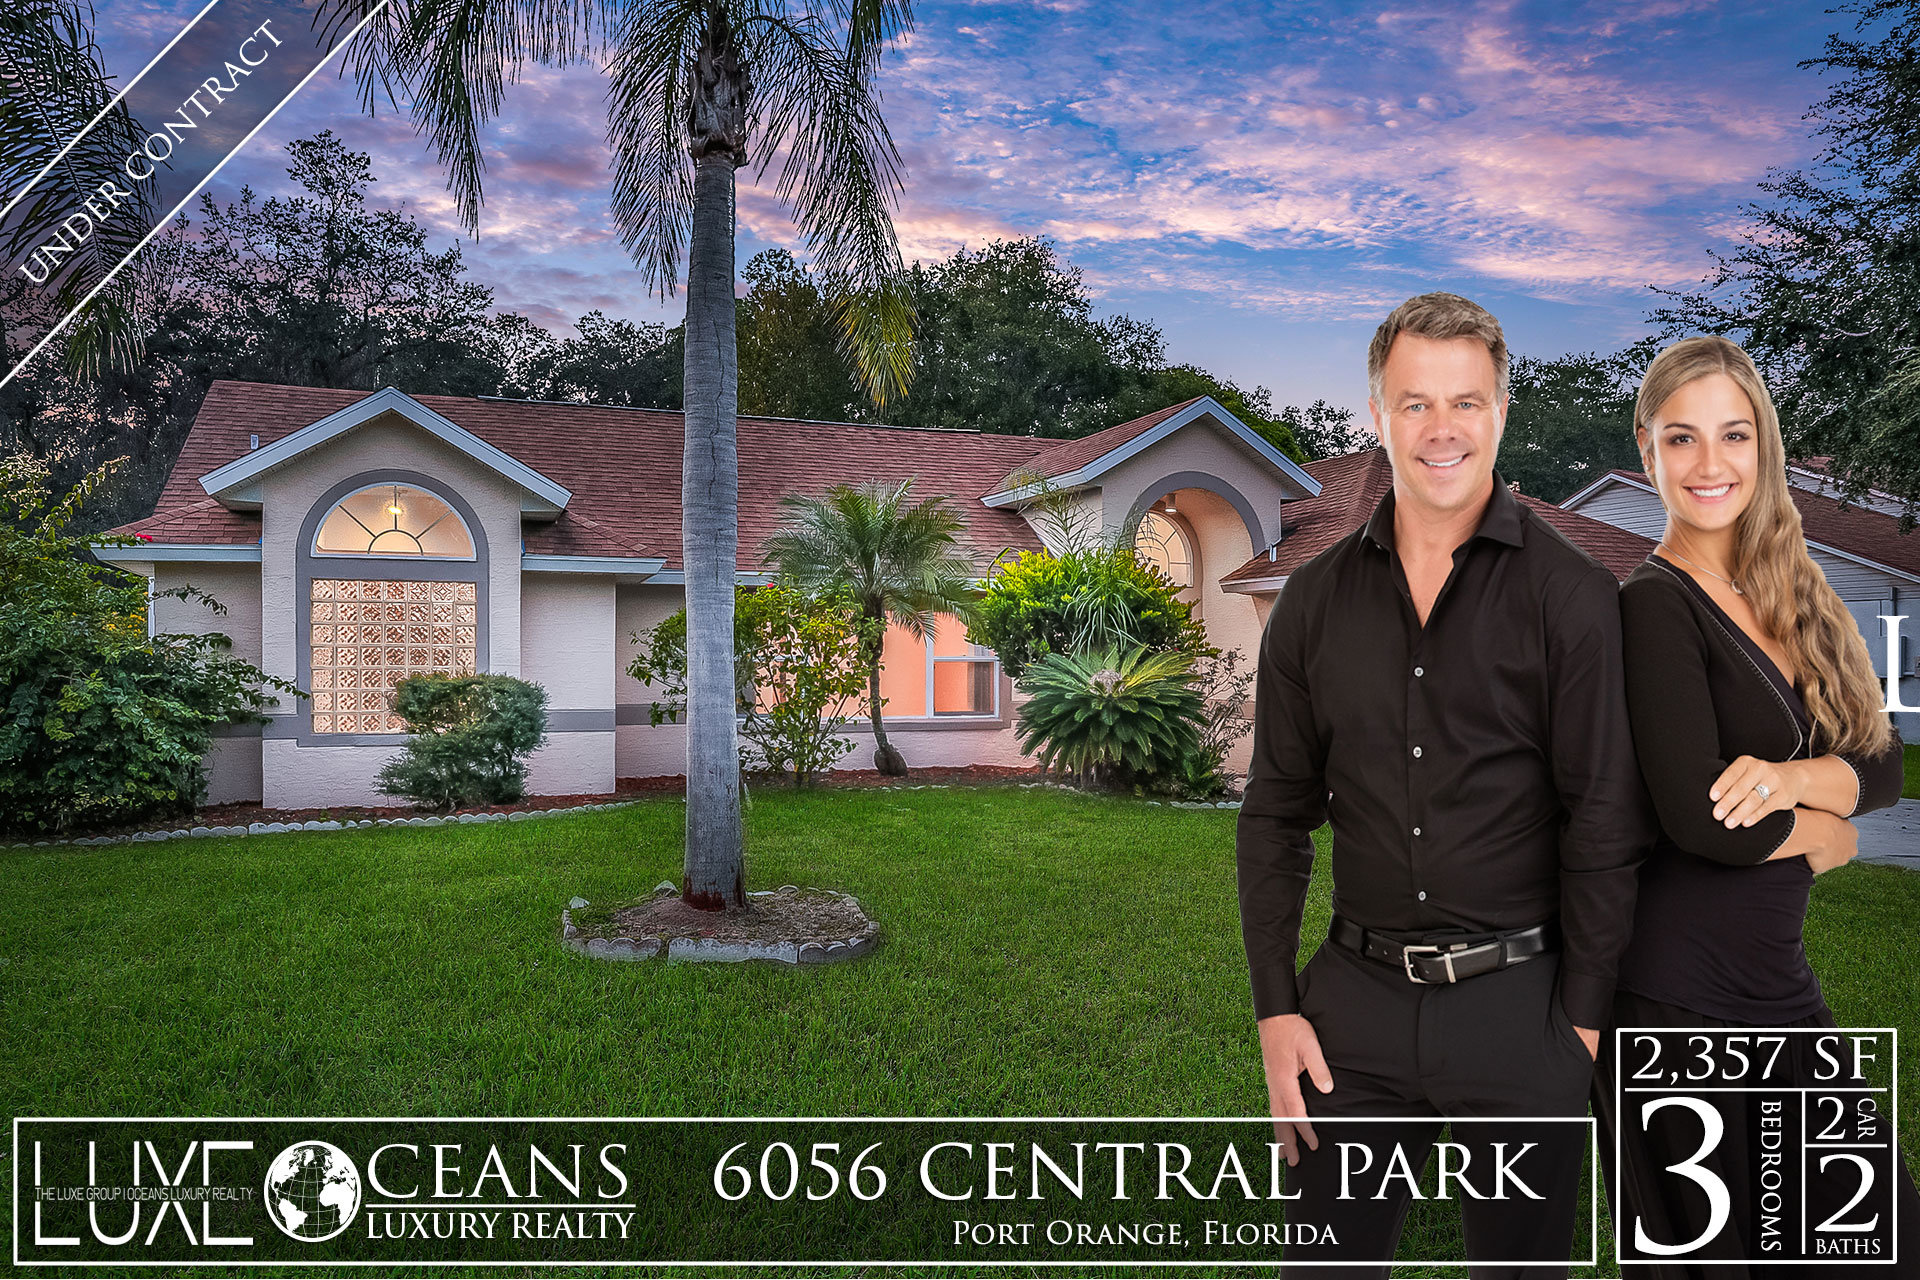 Port Orange Pool Homes  For Sale. Luxury Real Estate at 6056 Central Park Blvd Under Contract.